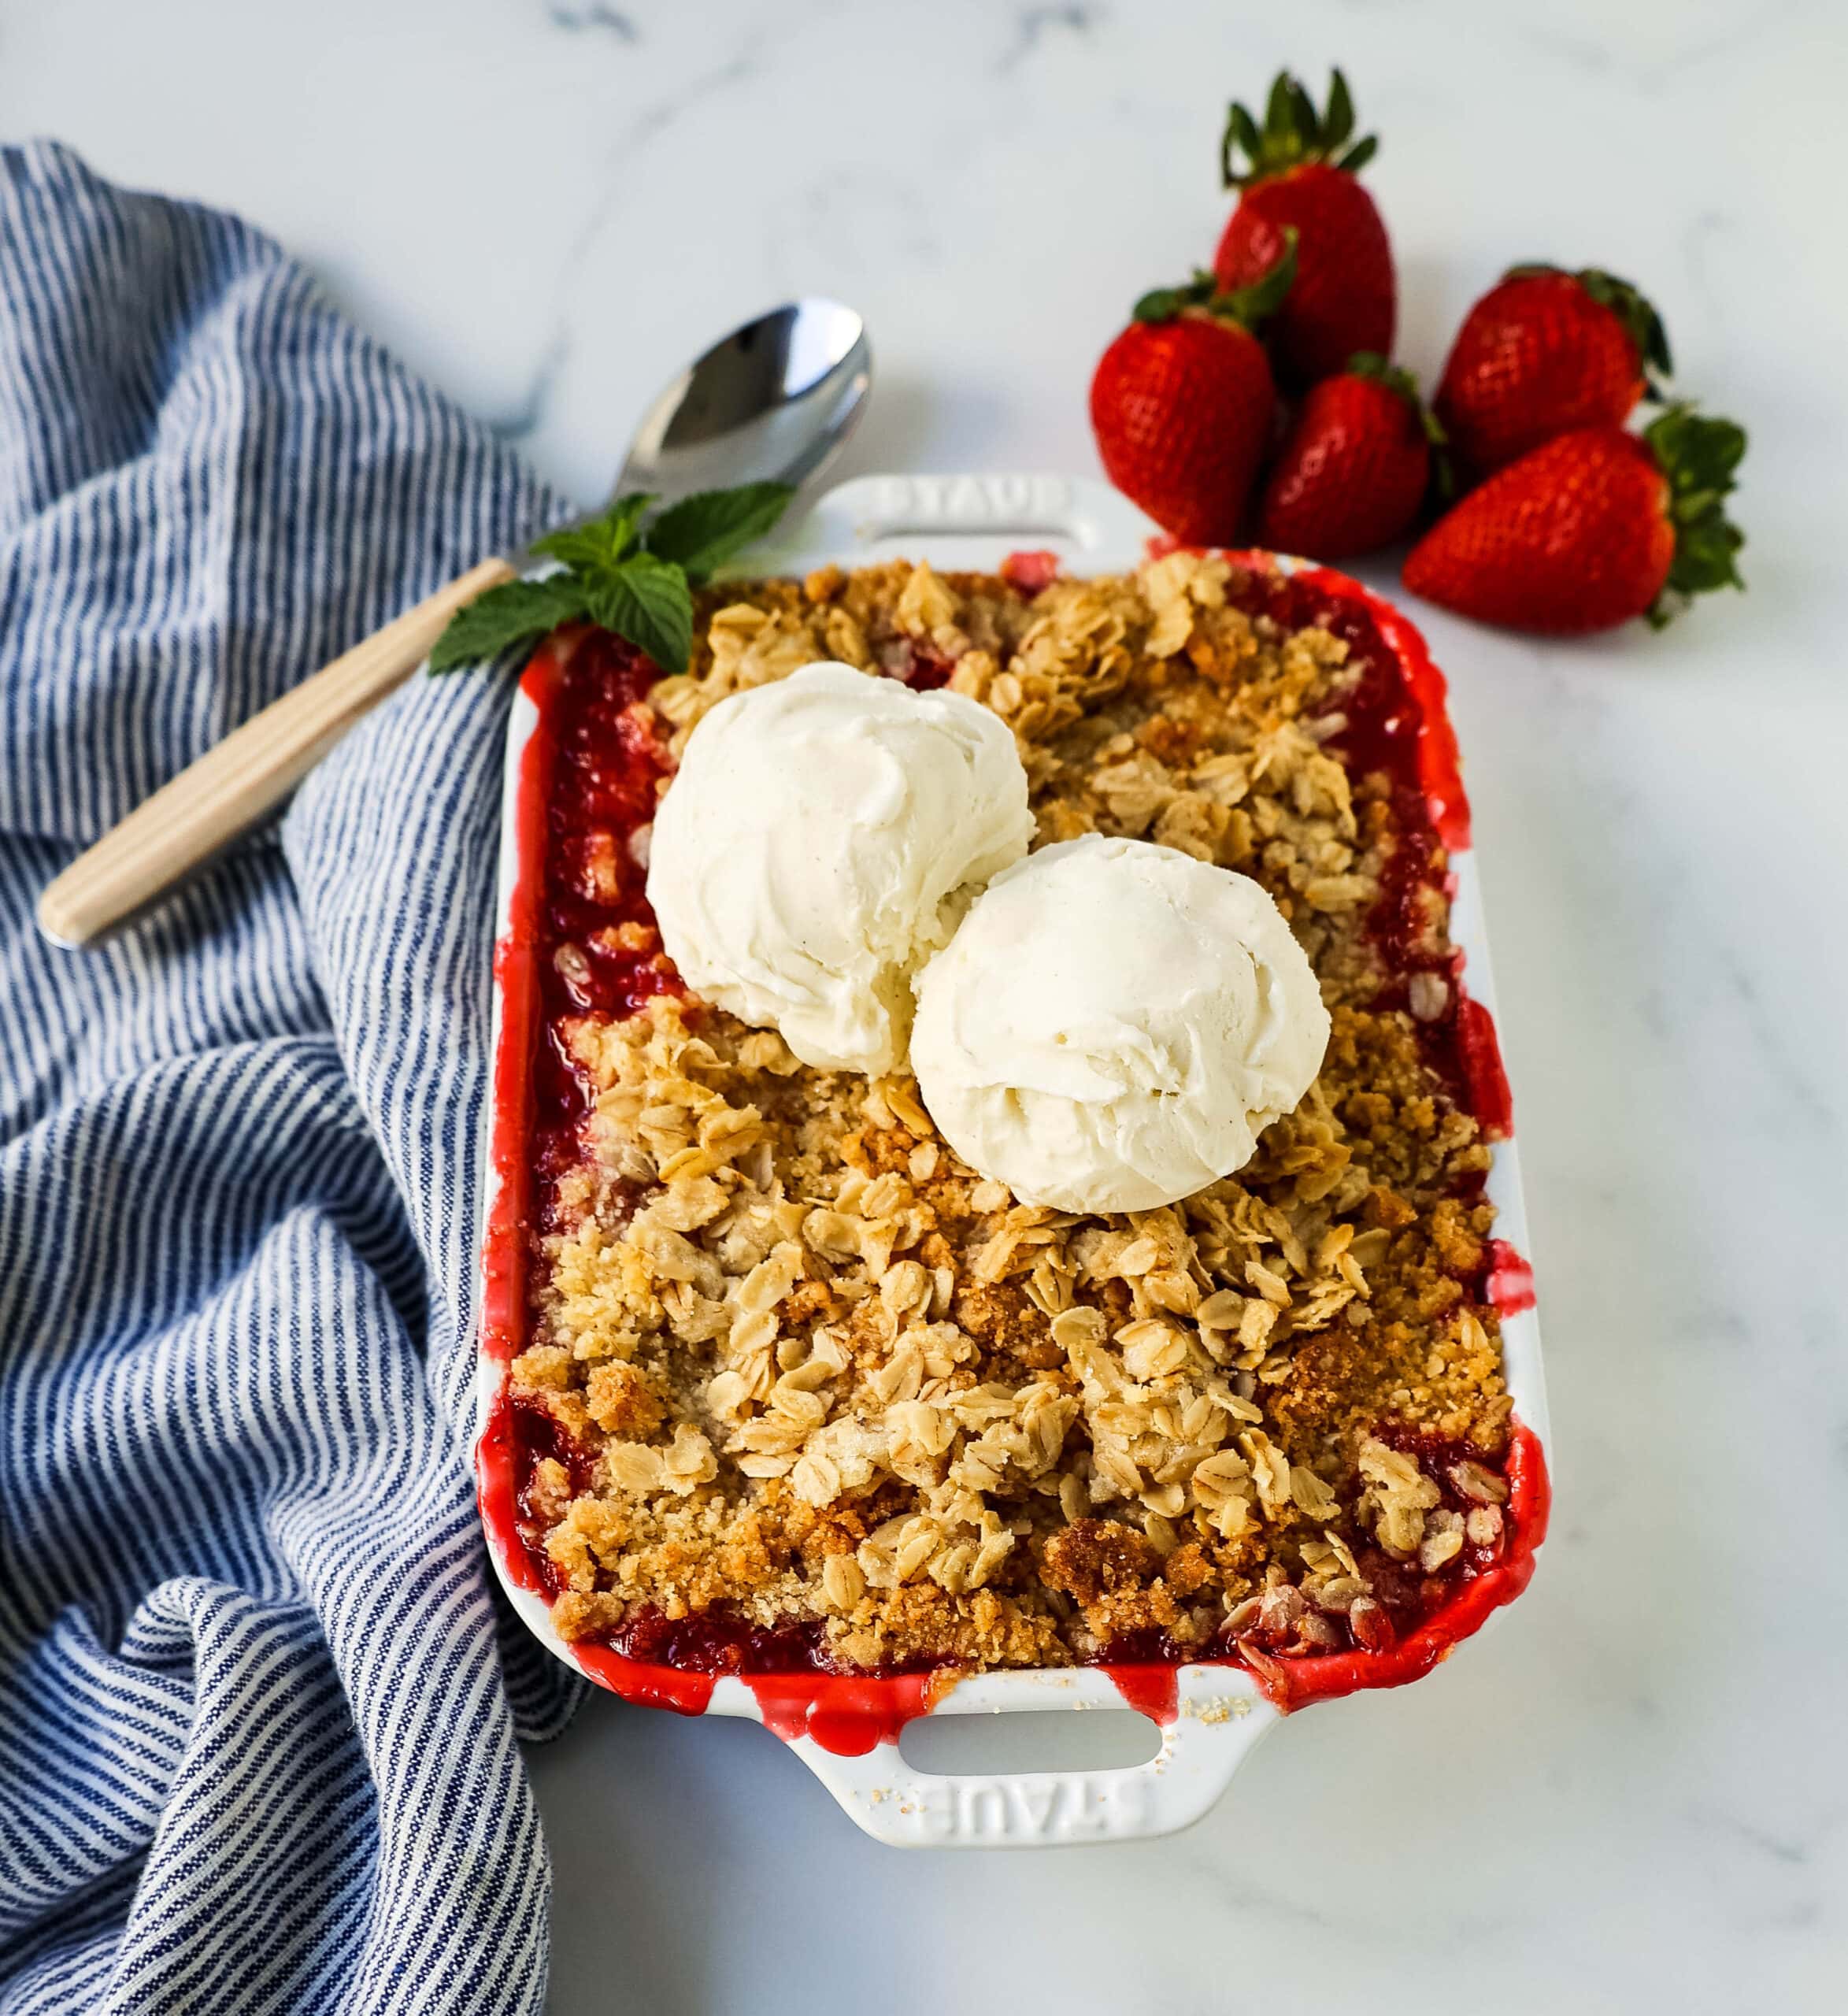 This Strawberry Crisp is made with fresh sweetened strawberries topped with a homemade buttery oat crumble topping. A Homemade Strawberry Crumble is an easy summer dessert. 